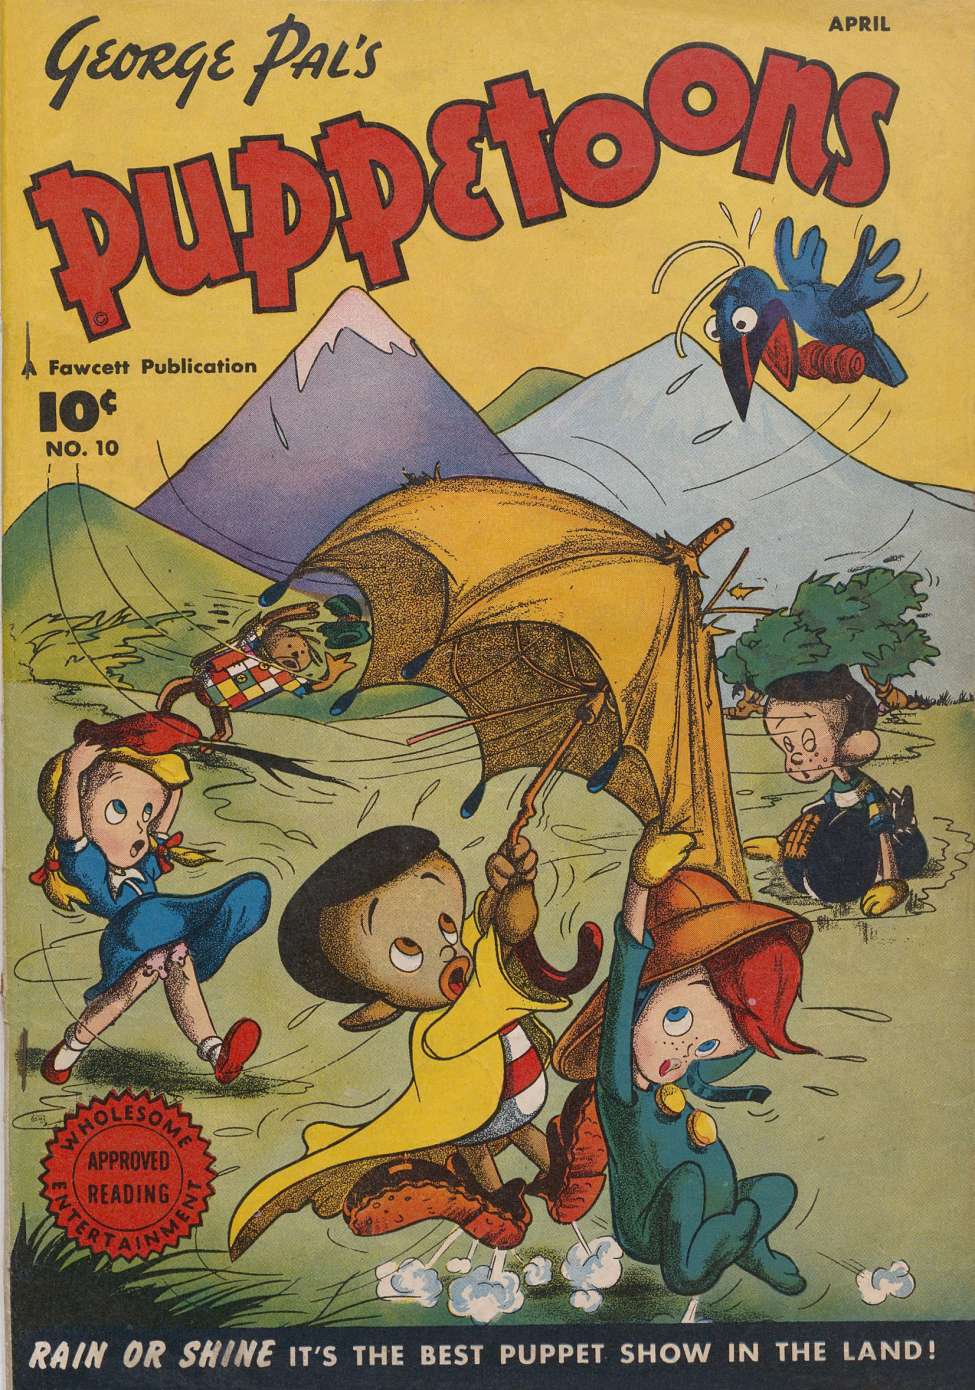 Book Cover For George Pal's Puppetoons 10